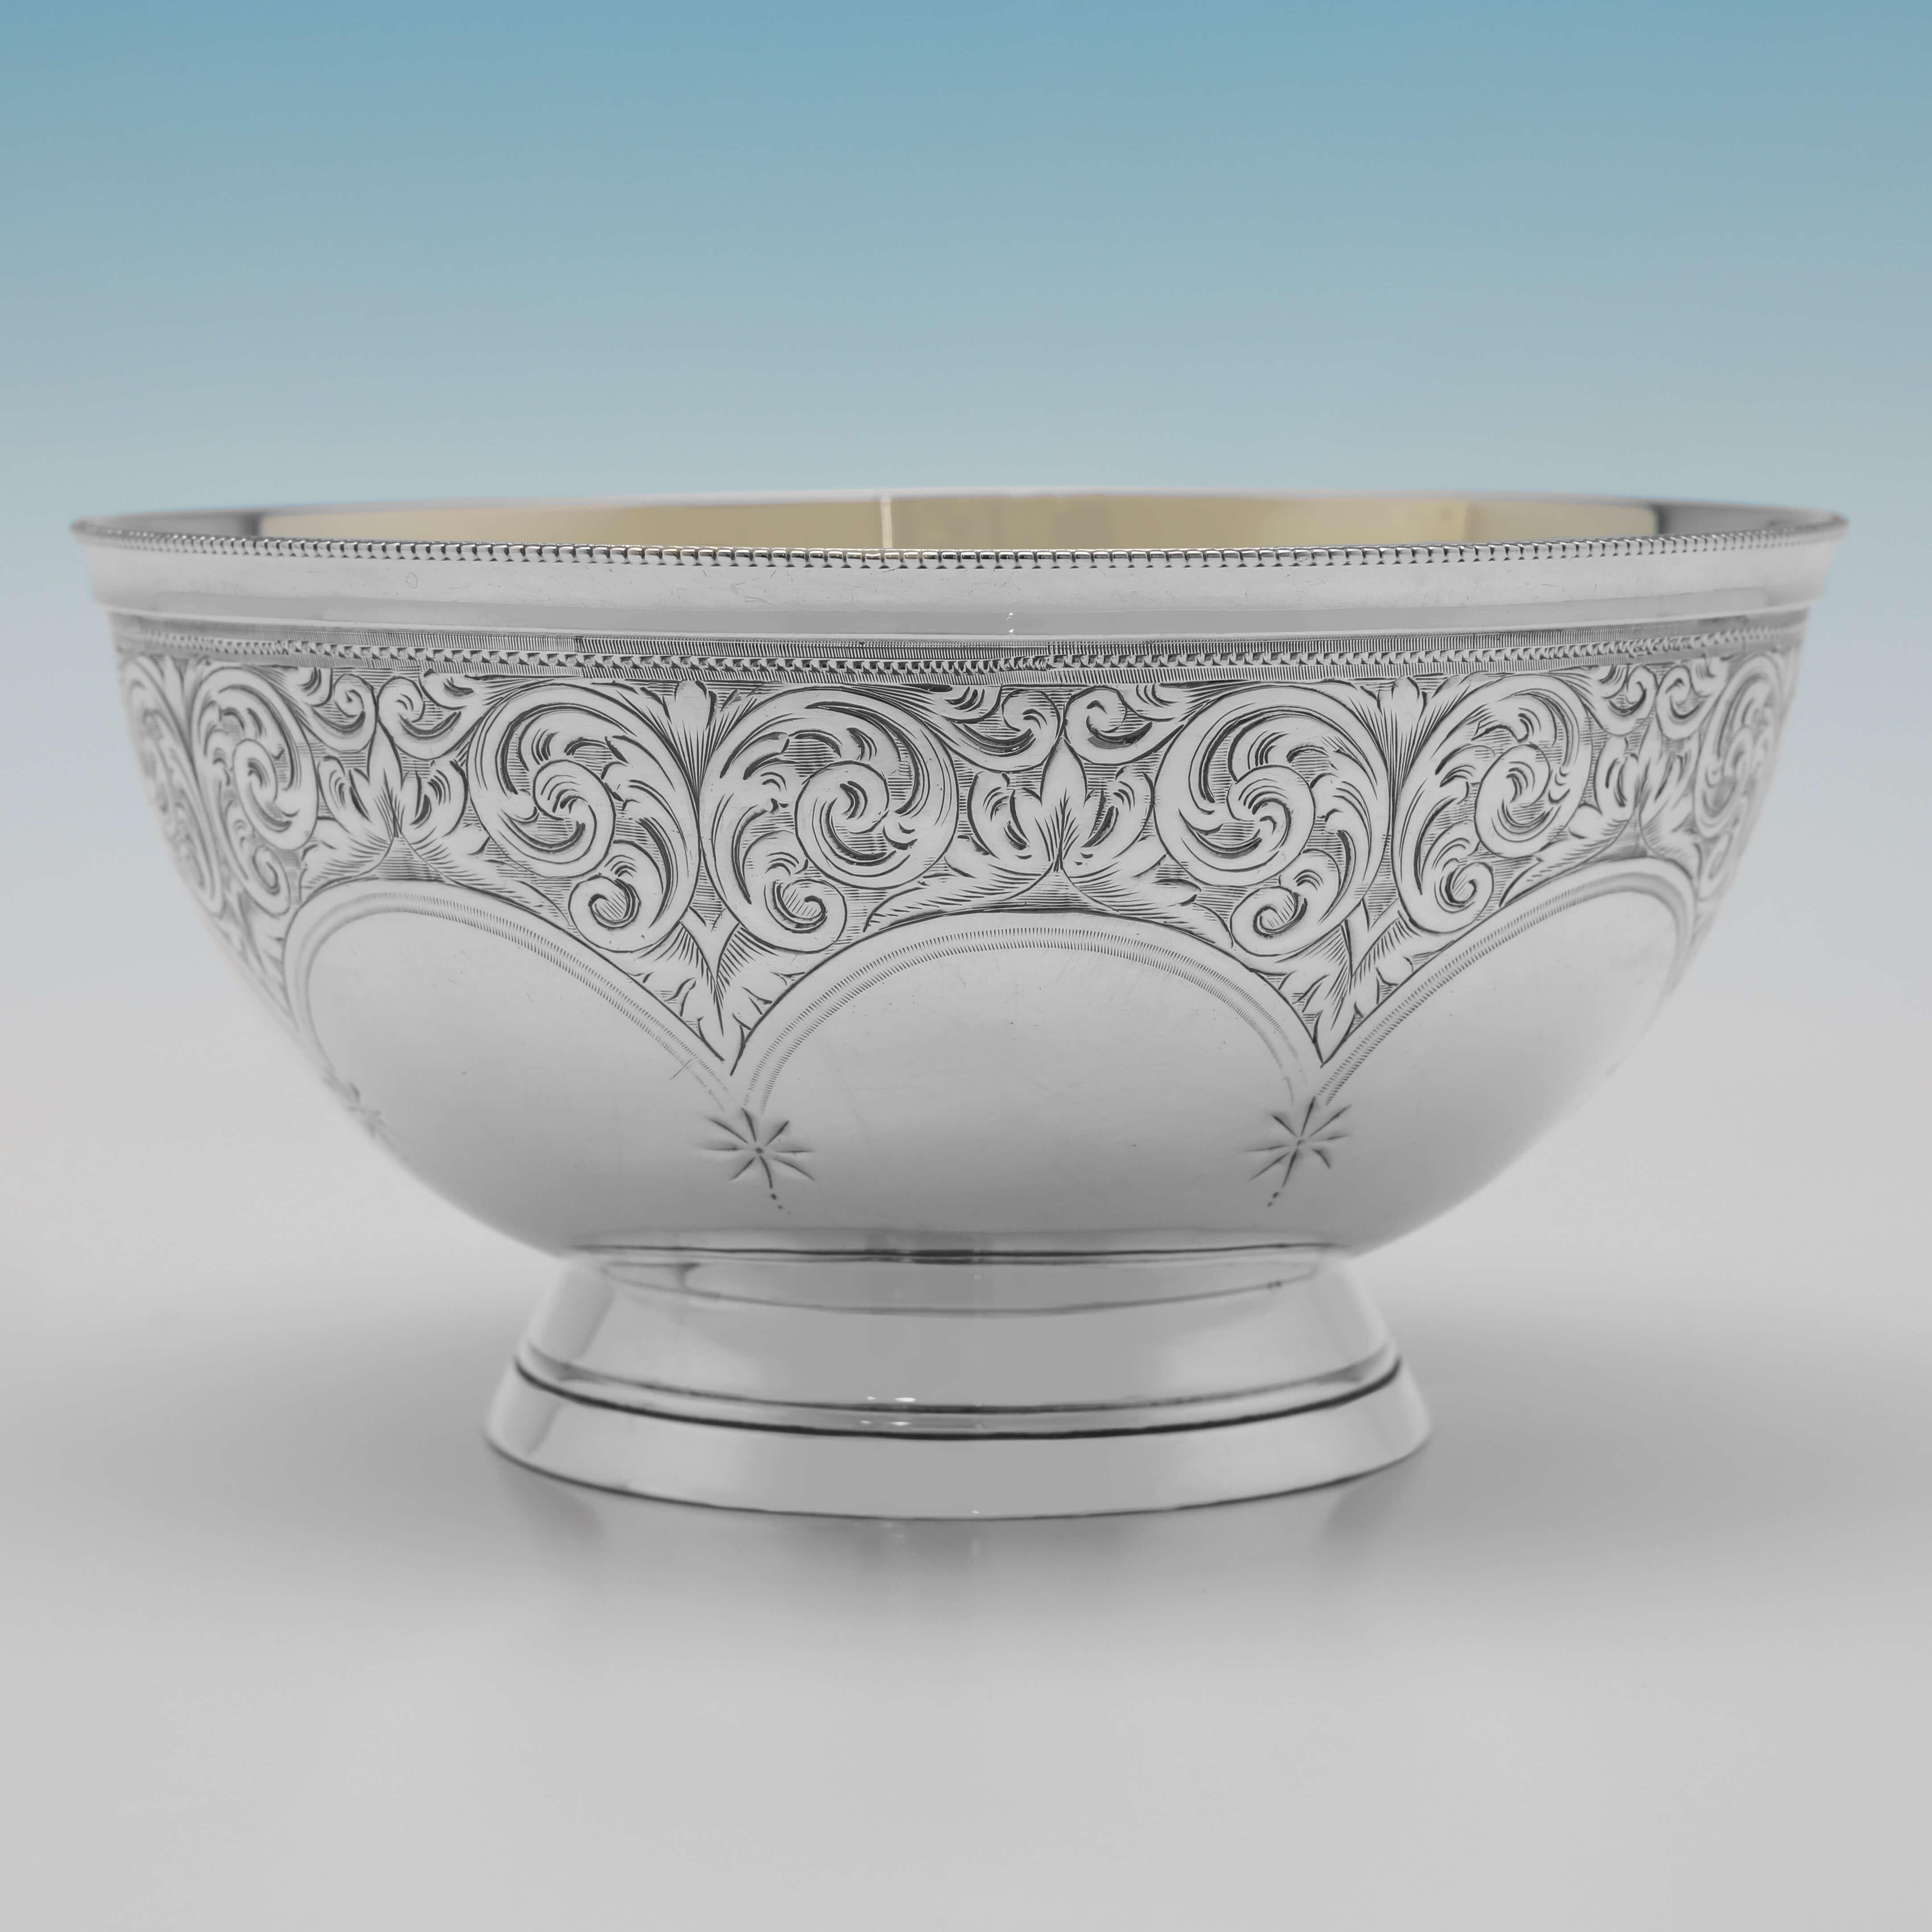 Hallmarked in London in 1891 by Edward Hutton, this very attractive, Victorian, Antique Sterling Silver Bowl, features a bead border, engraved decoration to the outside, and a gilt interior. 

The bowl measures 2.5